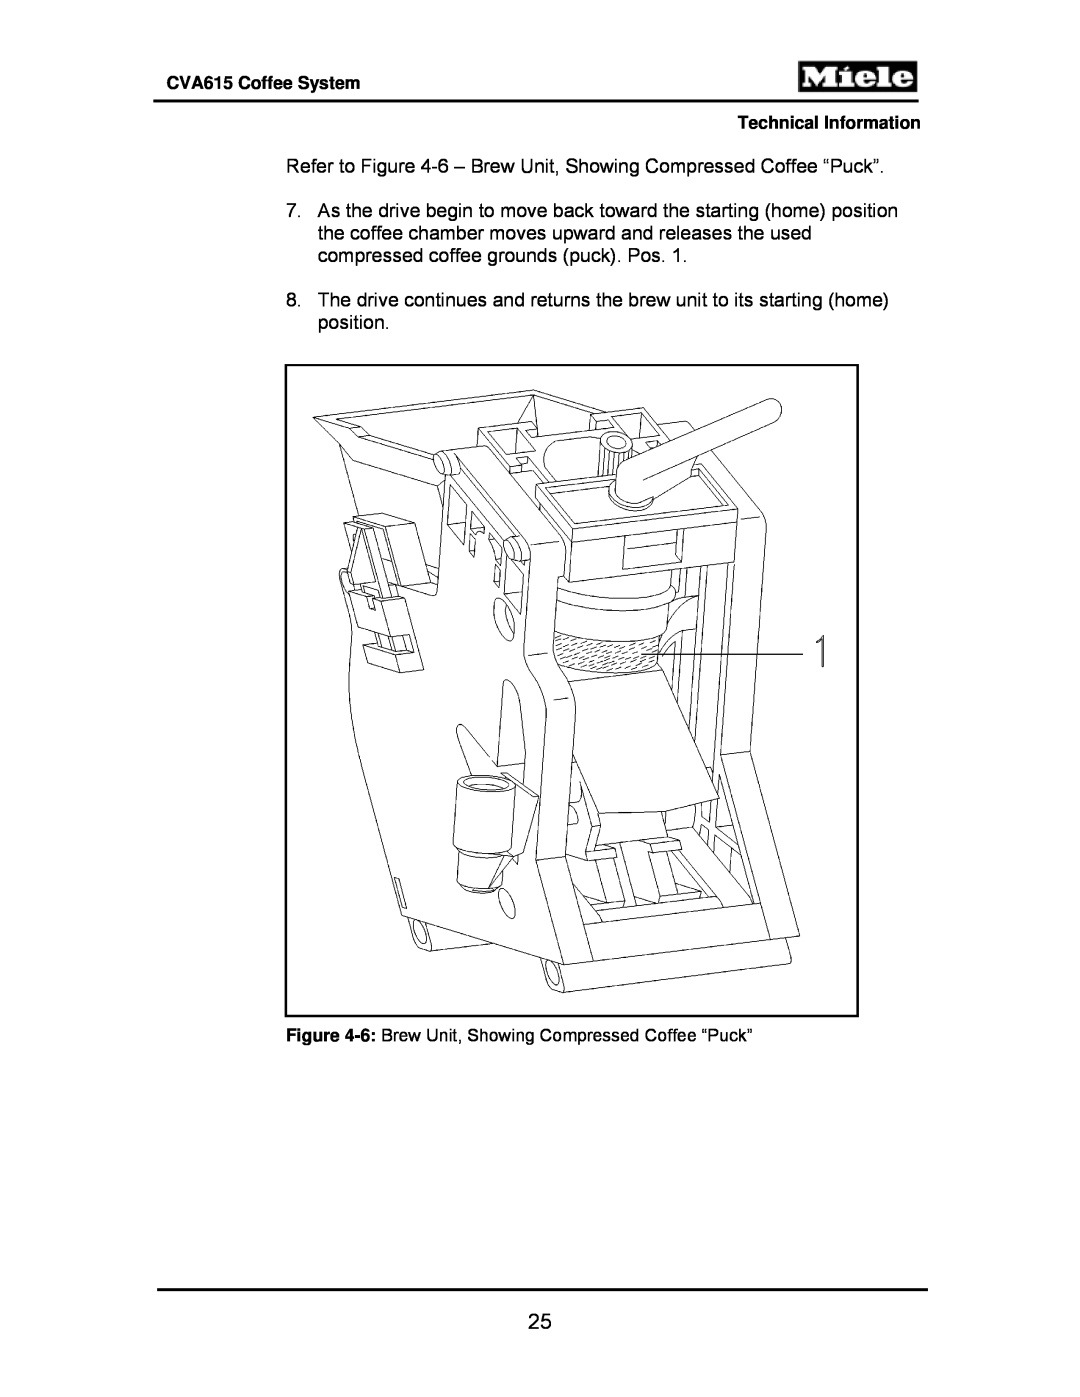 Miele CVA615 manual Refer to -6– Brew Unit, Showing Compressed Coffee “Puck” 